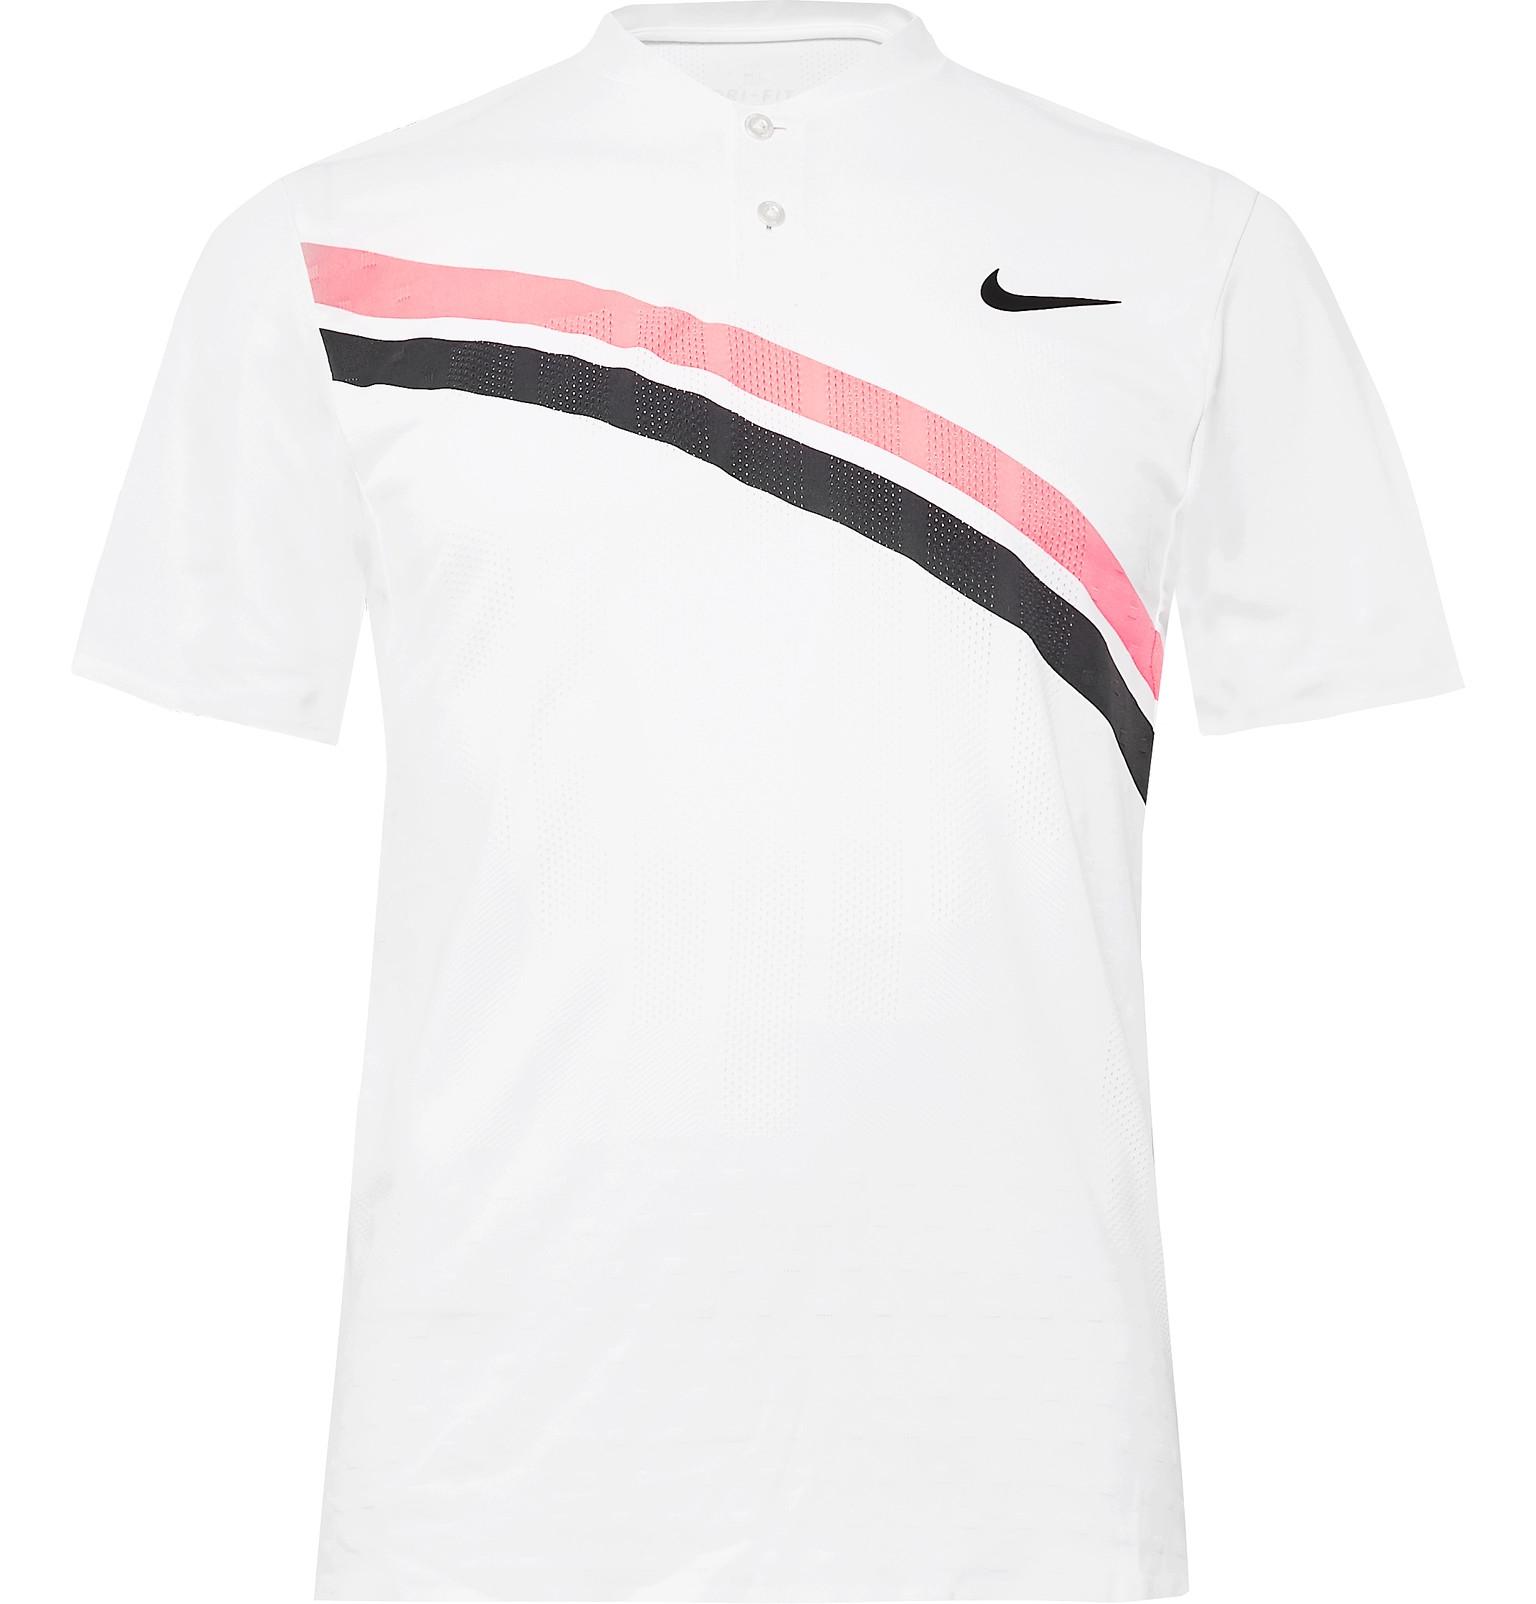 Nike Synthetic Zonal Cooling Roger Federer Striped Dri-fit Mesh Tennis ...